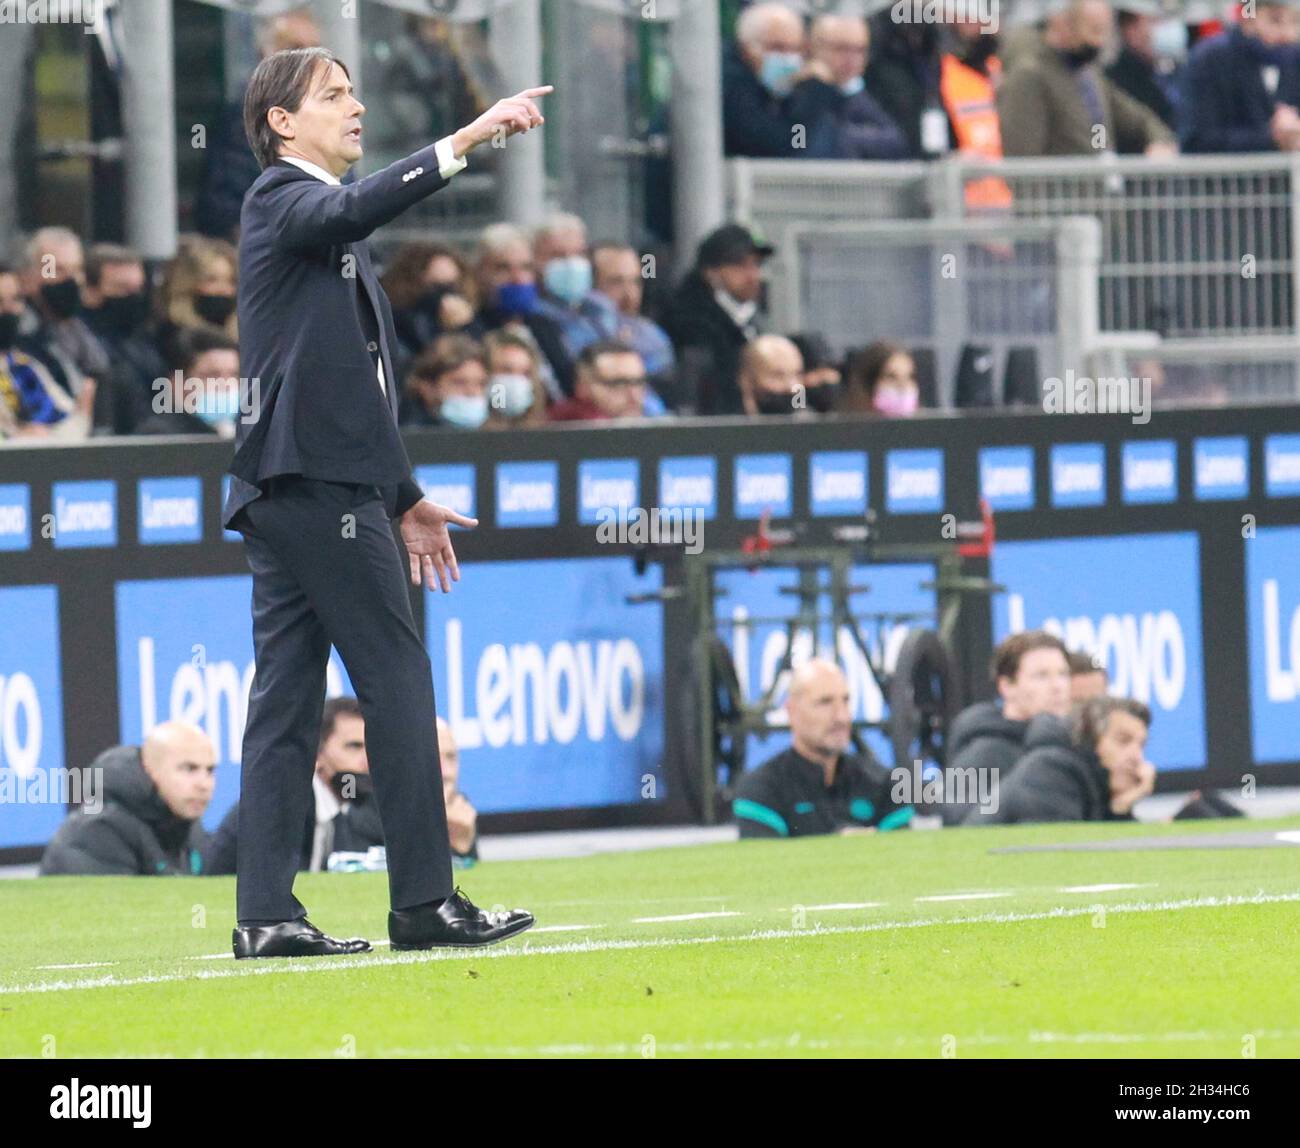 MILAN ITALY- October 24 Stadio G Meazza  Simone Inzaghi Head Coach during the Serie A match between Fc Inter and Fc Juventus   at Stadio G. Meazza on October 24, 2021 in Milan, Italy. Stock Photo